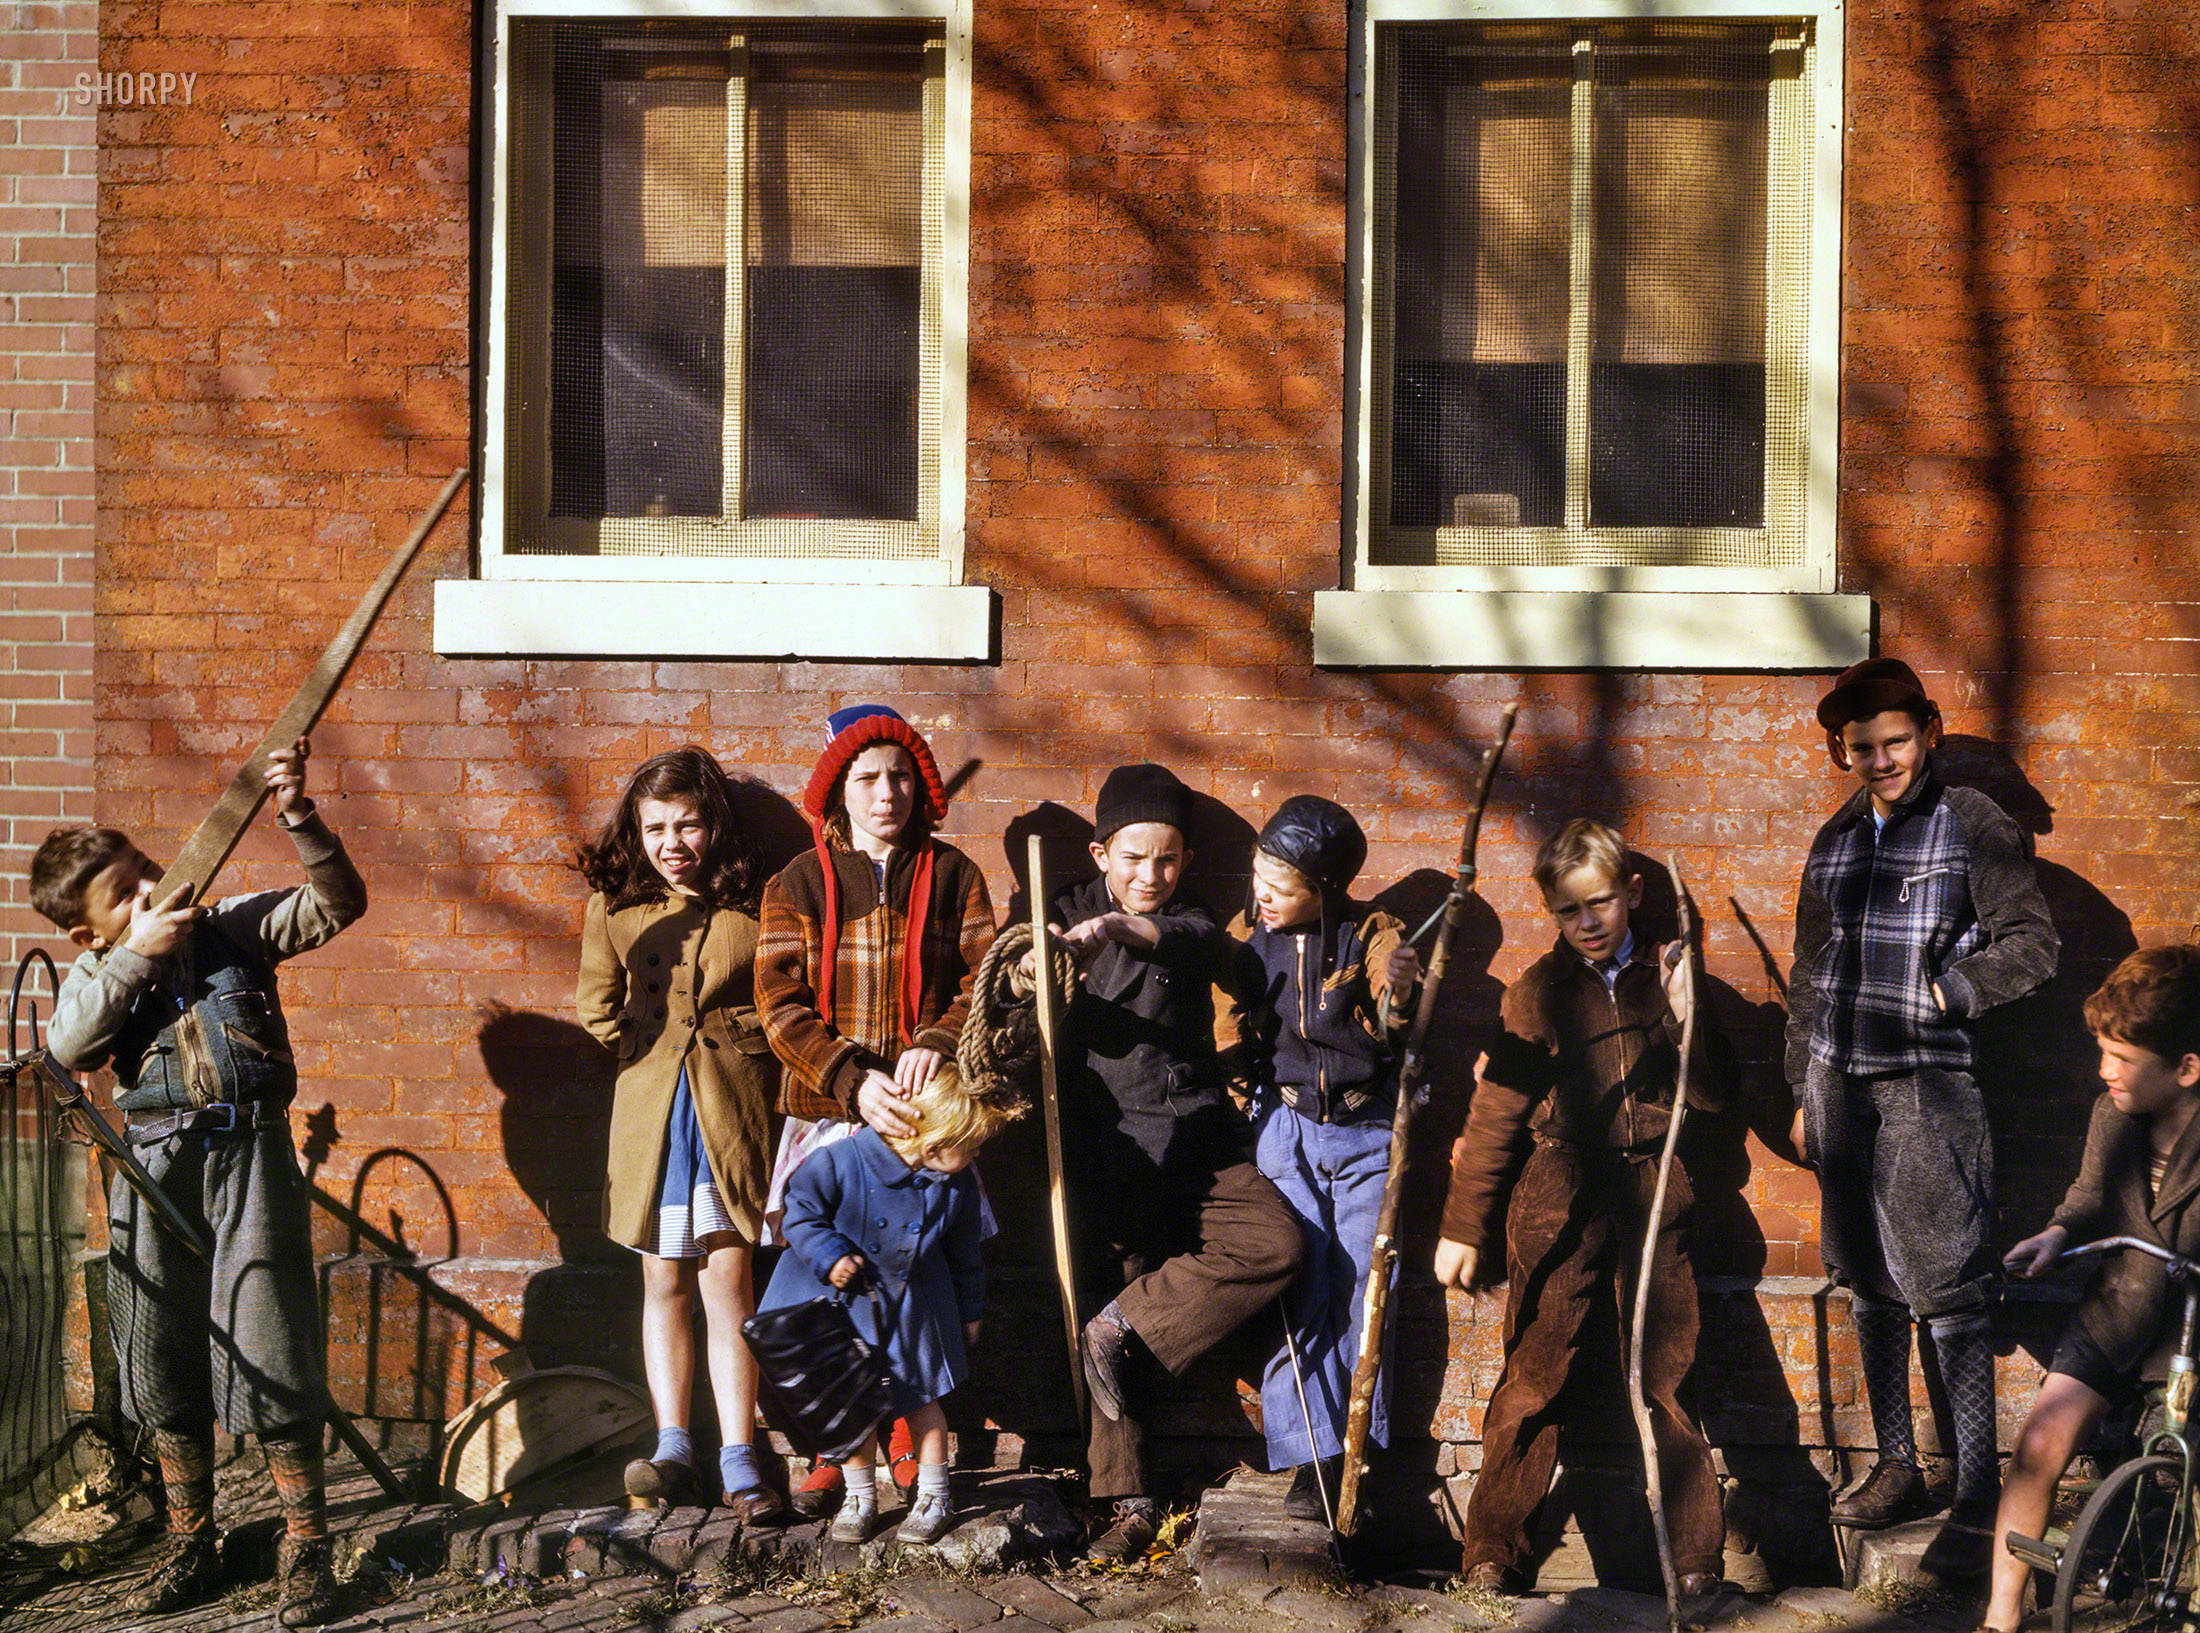 Washington, D.C., 1942. "Children playing, aiming sticks as guns." Kodachrome transparency by Louise Rosskam for the Office of War Information. View full size.